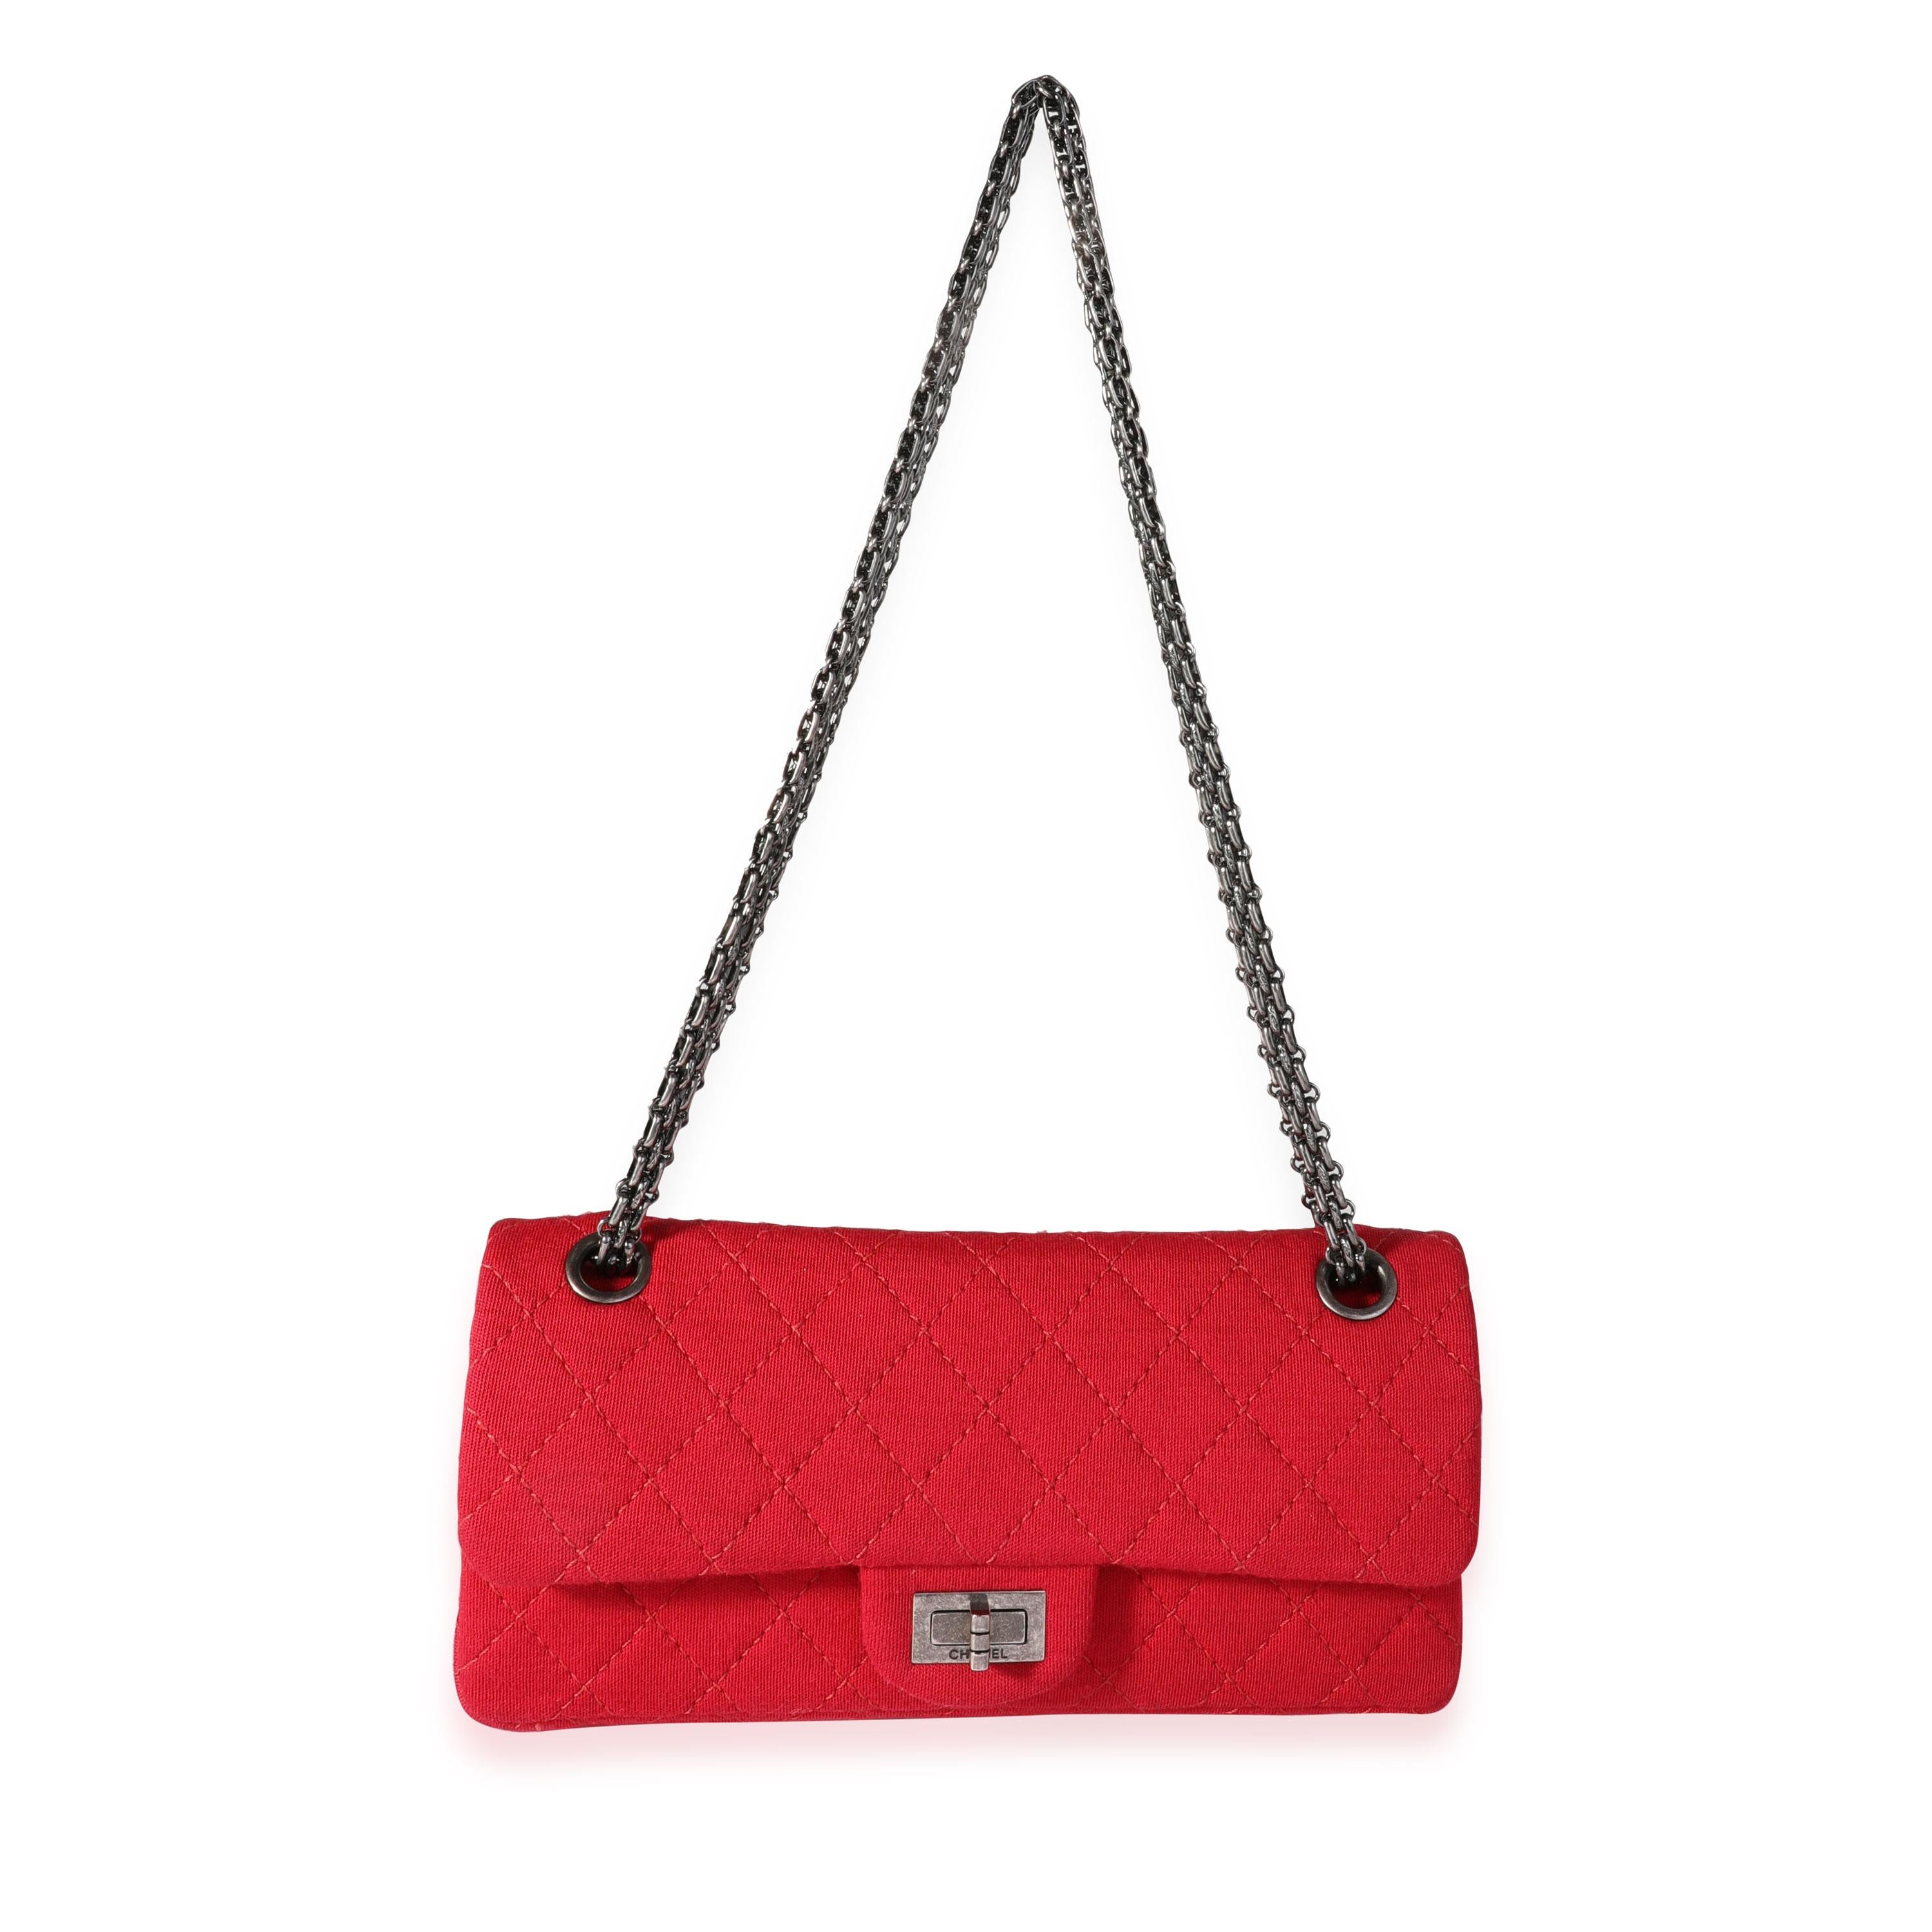 Listing Title: Chanel Red Jersey East West Reissue Double Flap Bag
SKU: 118315
Condition: Pre-owned (3000)
Handbag Condition: Very Good
Condition Comments: Very Good Condition. Creasing to bottom due to flat storage. Marks to jersey near hardware